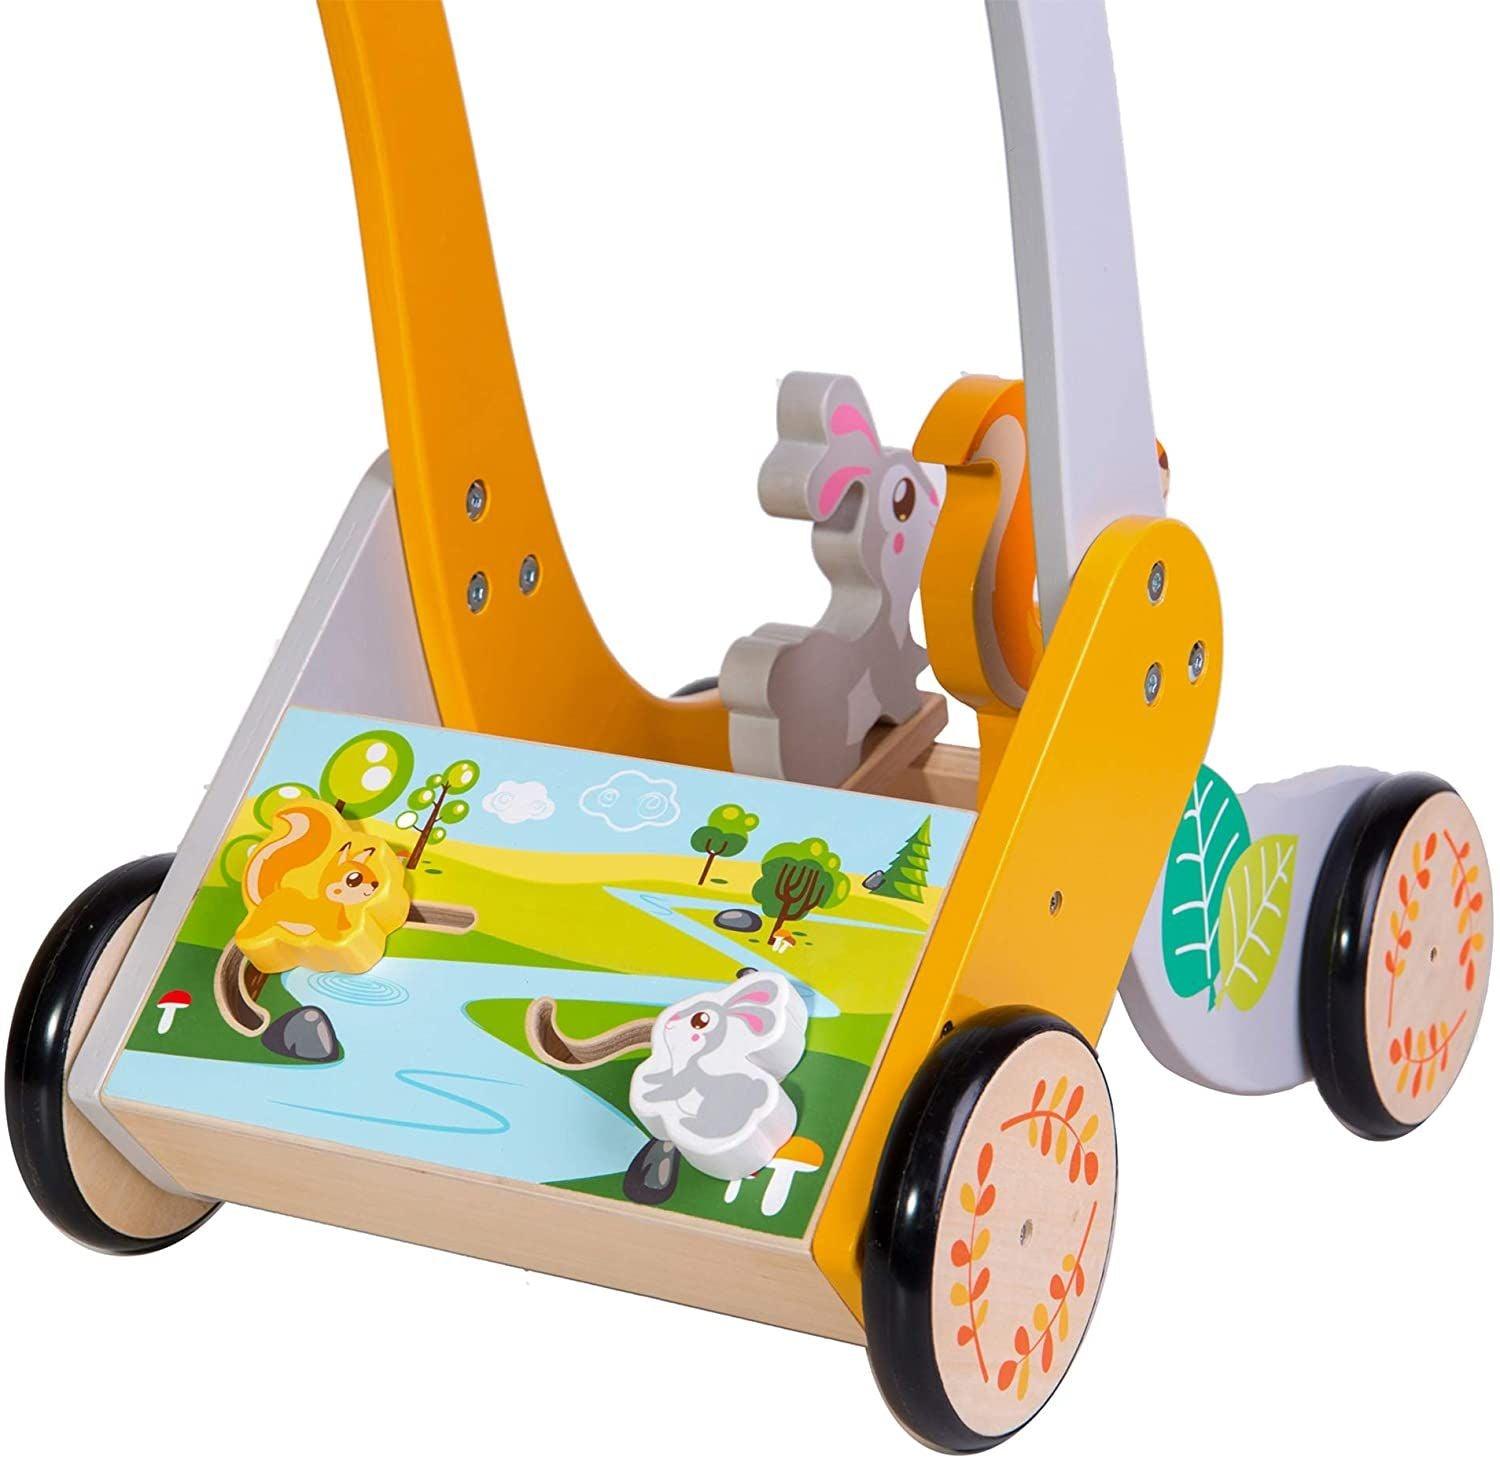 Wooden Walker with forest animals - MoonyBoon